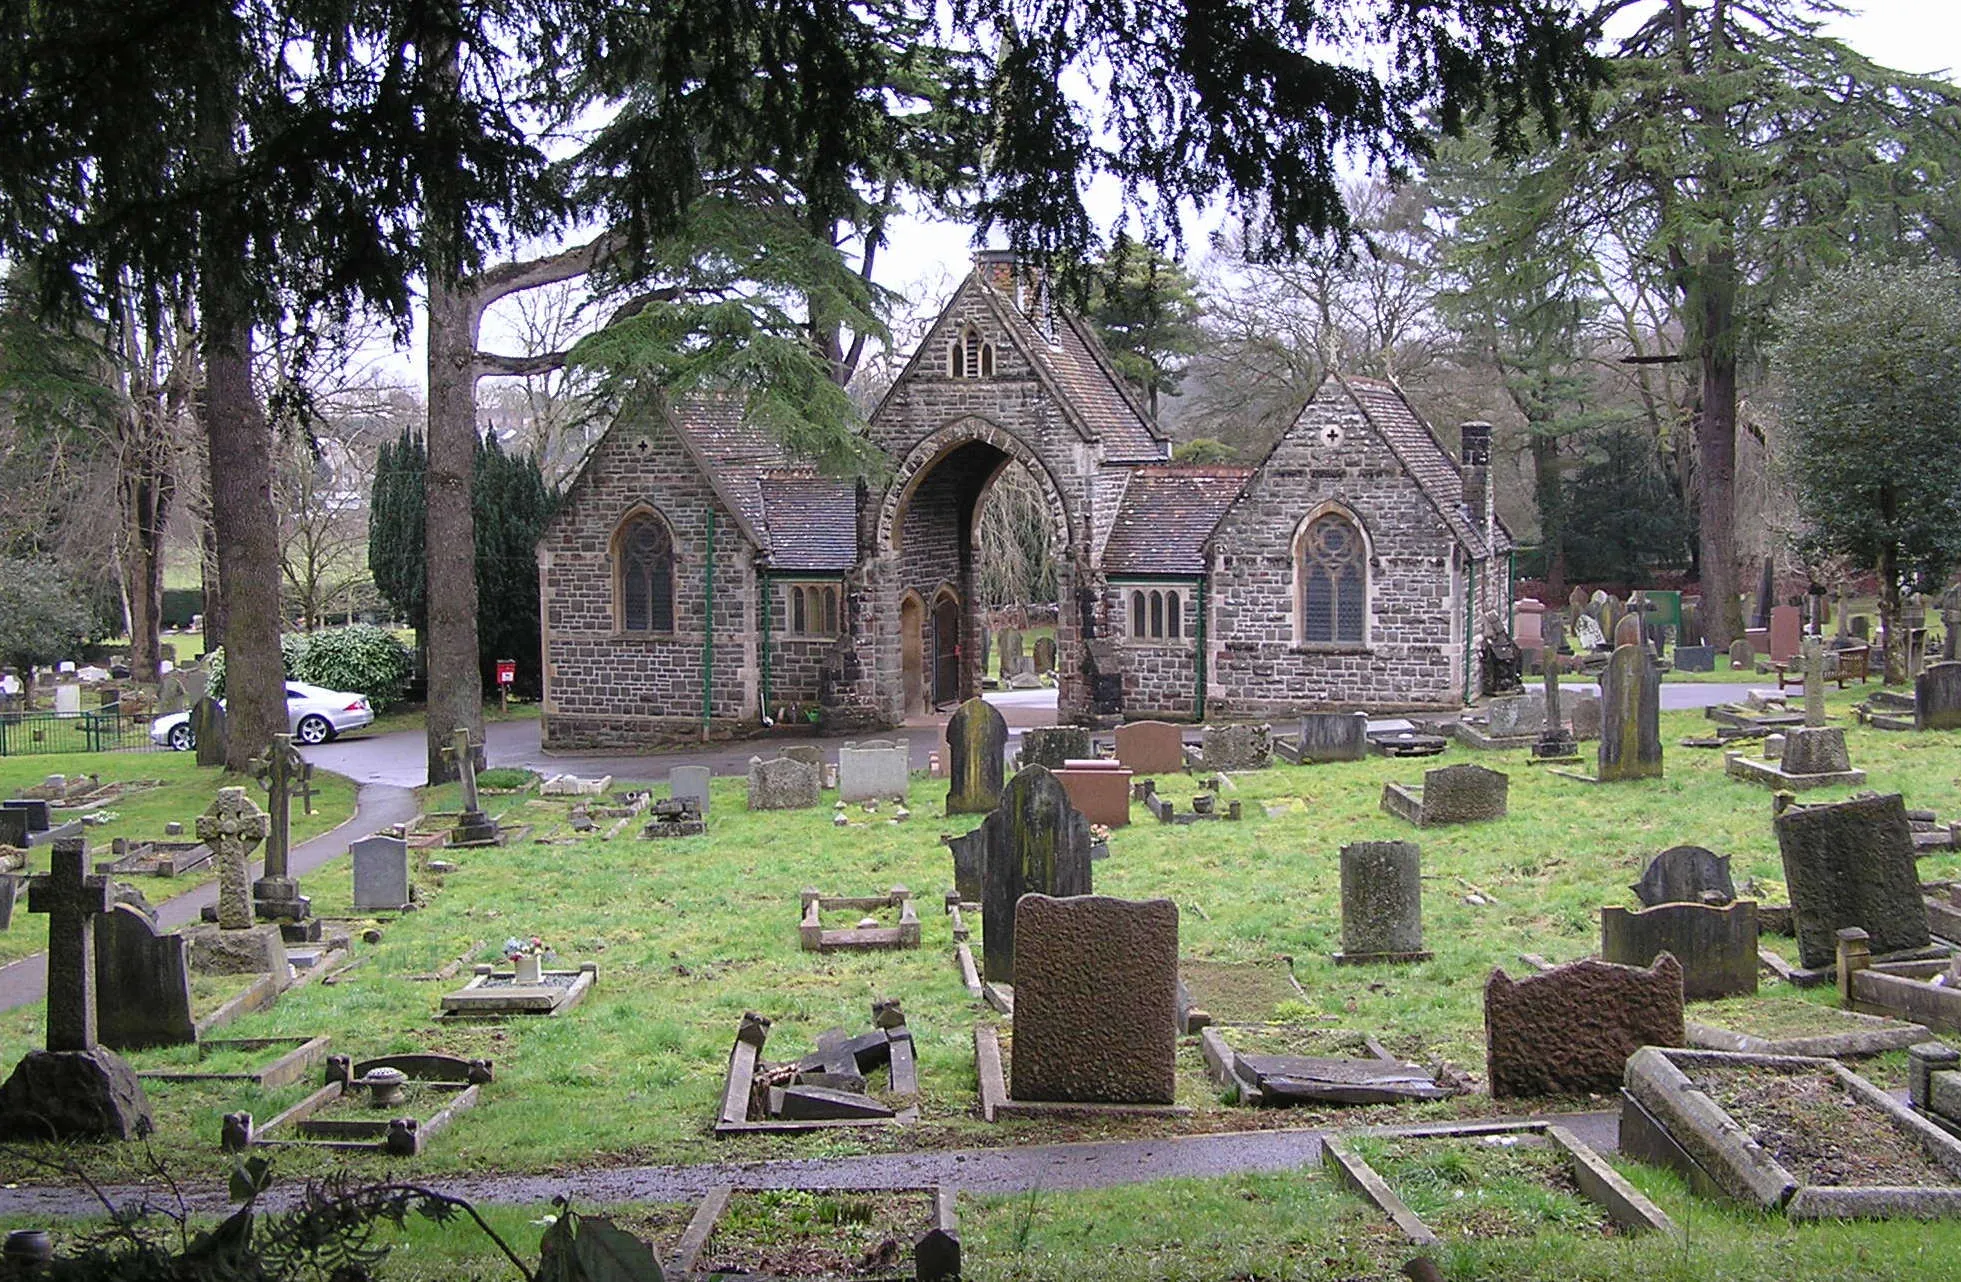 Photo showing: Keynsham Cemetery The land for this was purchased in 1877. When digging graves it was discovered that underneath was one of the largest and elaborate Romano-British villas in England. It has been described as a minor palace.